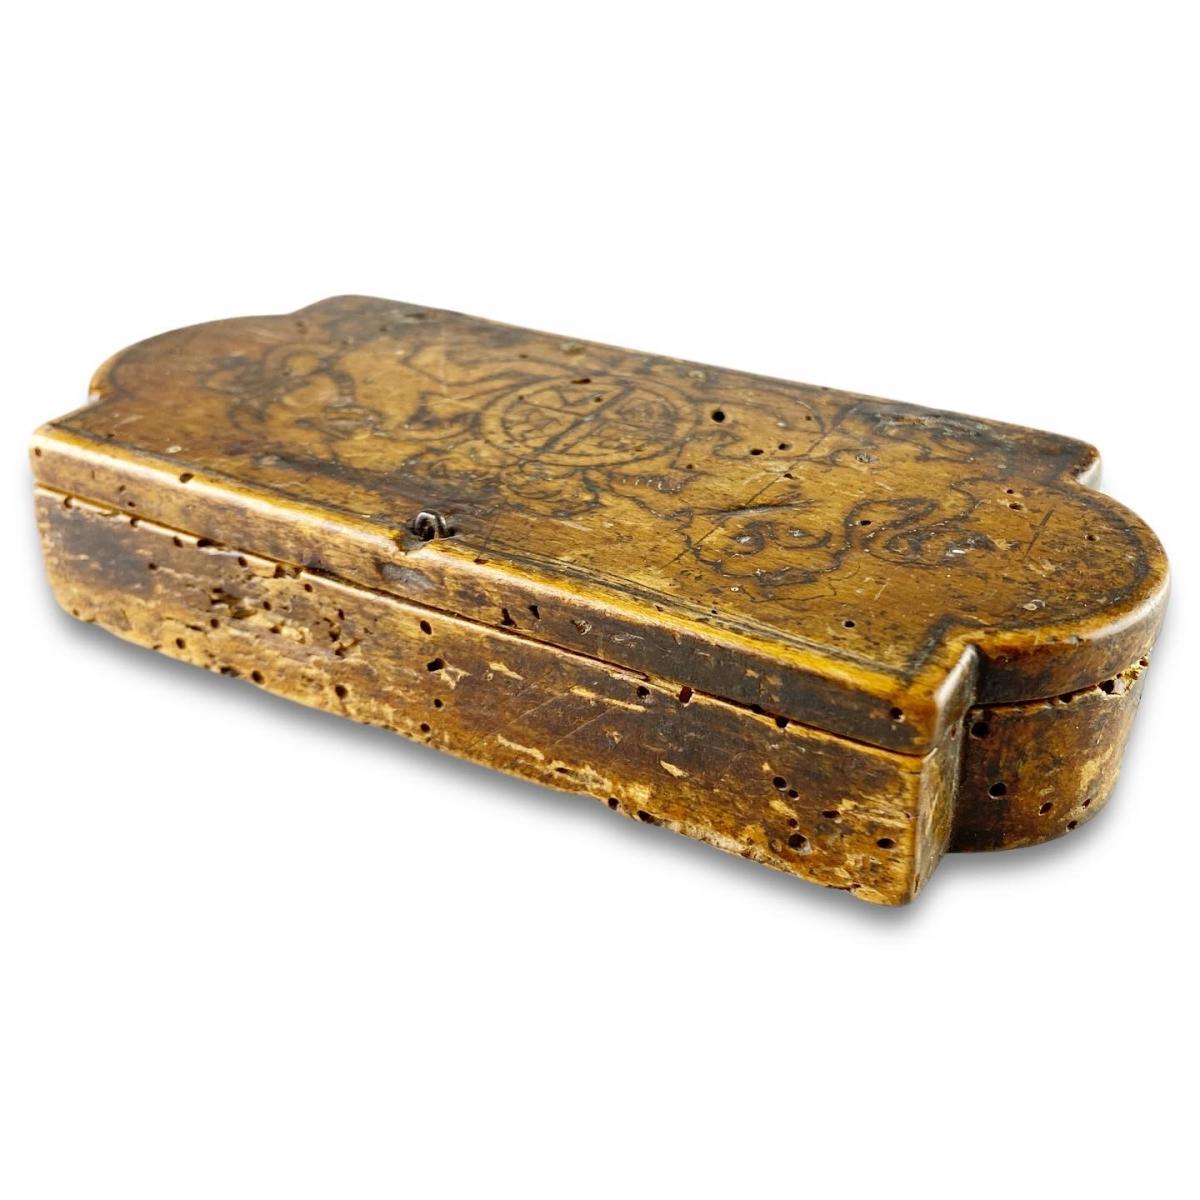 Early glasses case with royal coat of arms. English, 17th century